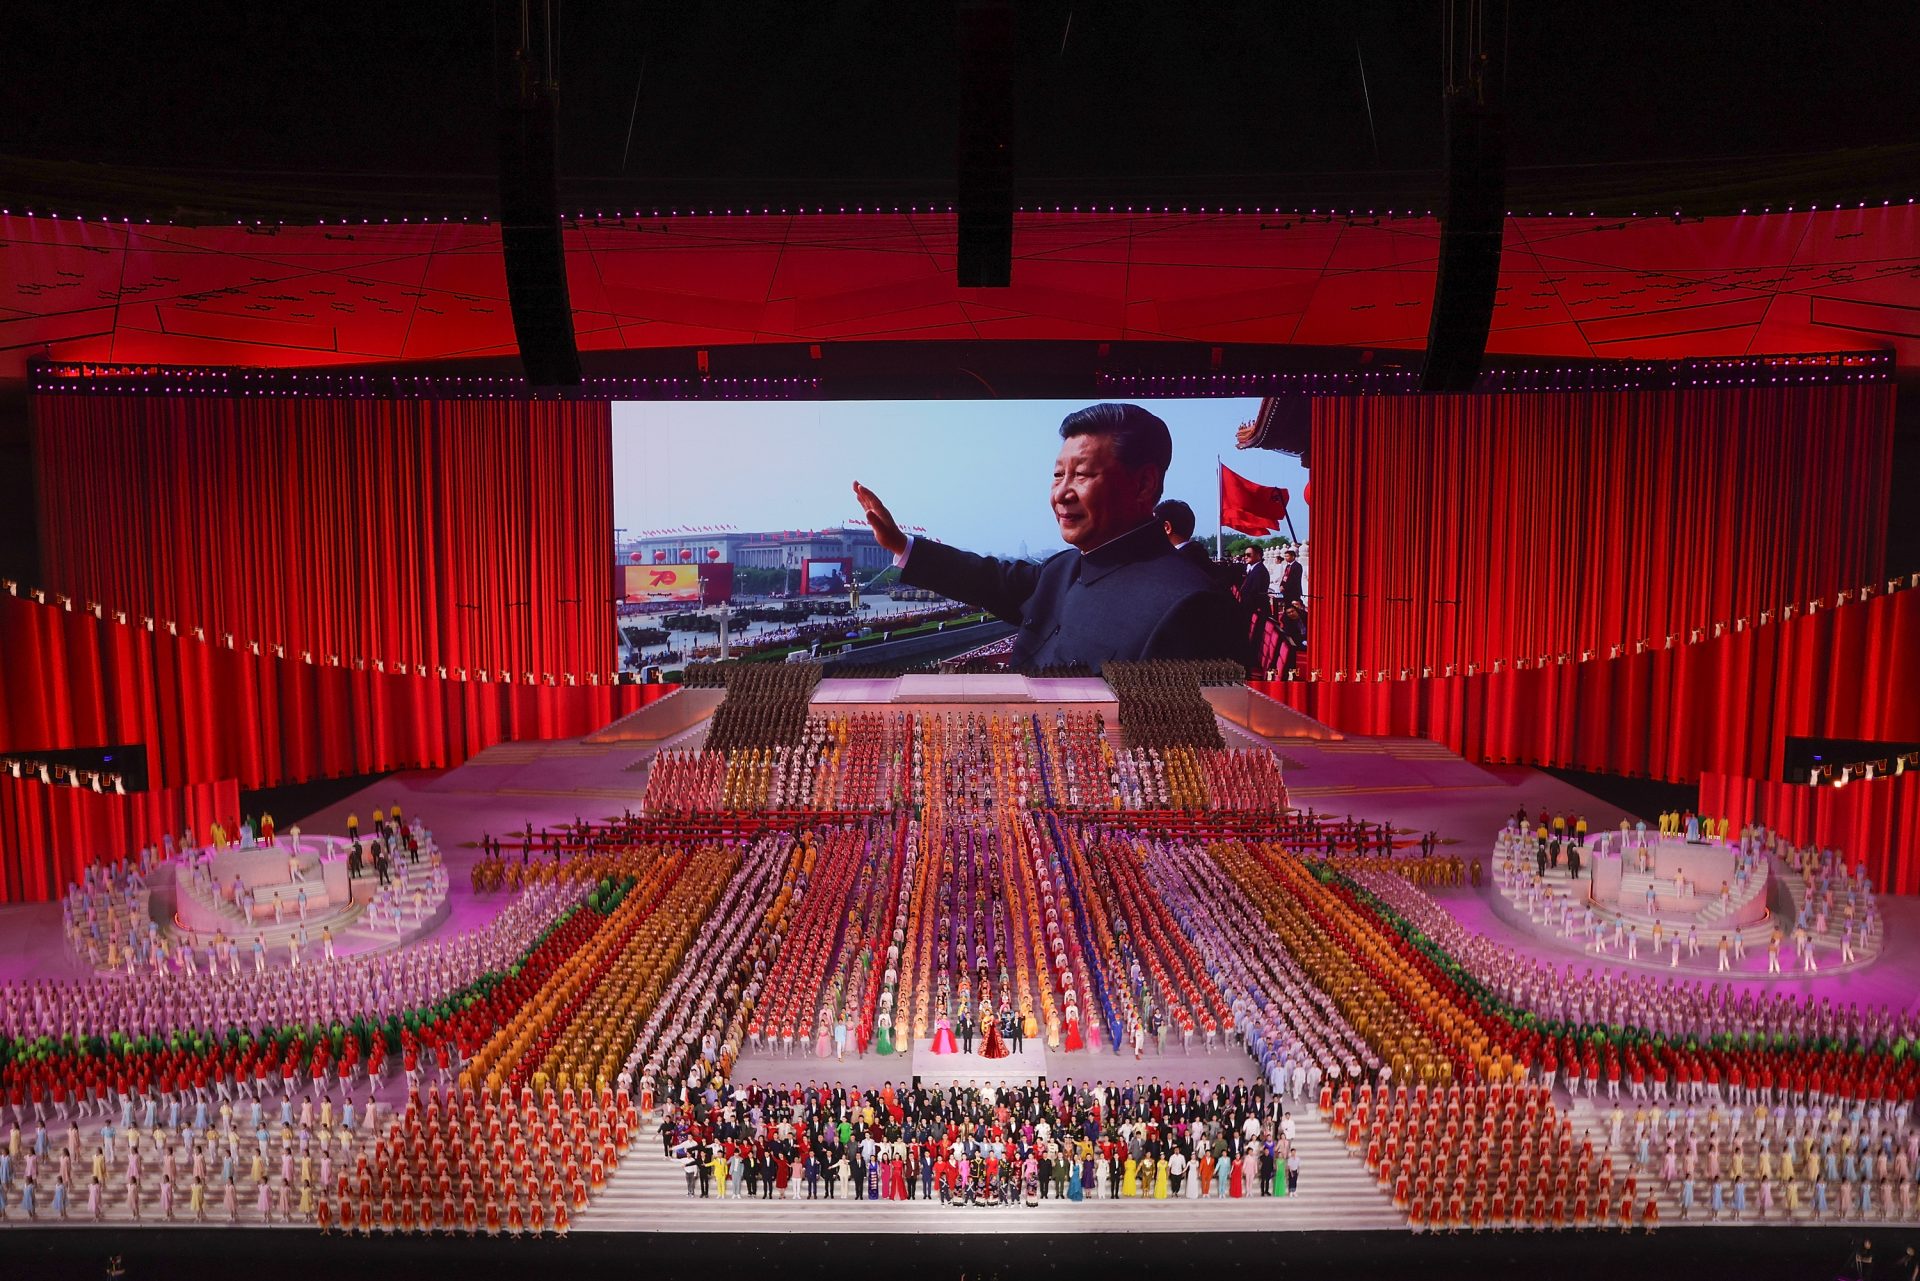 Xi Jinping, in a Maostyle tunic, appears on screen during a performance to mark the 100th anniversary of the Chinese Communist Party, in June 2021. Photo: Lintao Zhang/ Getty Images